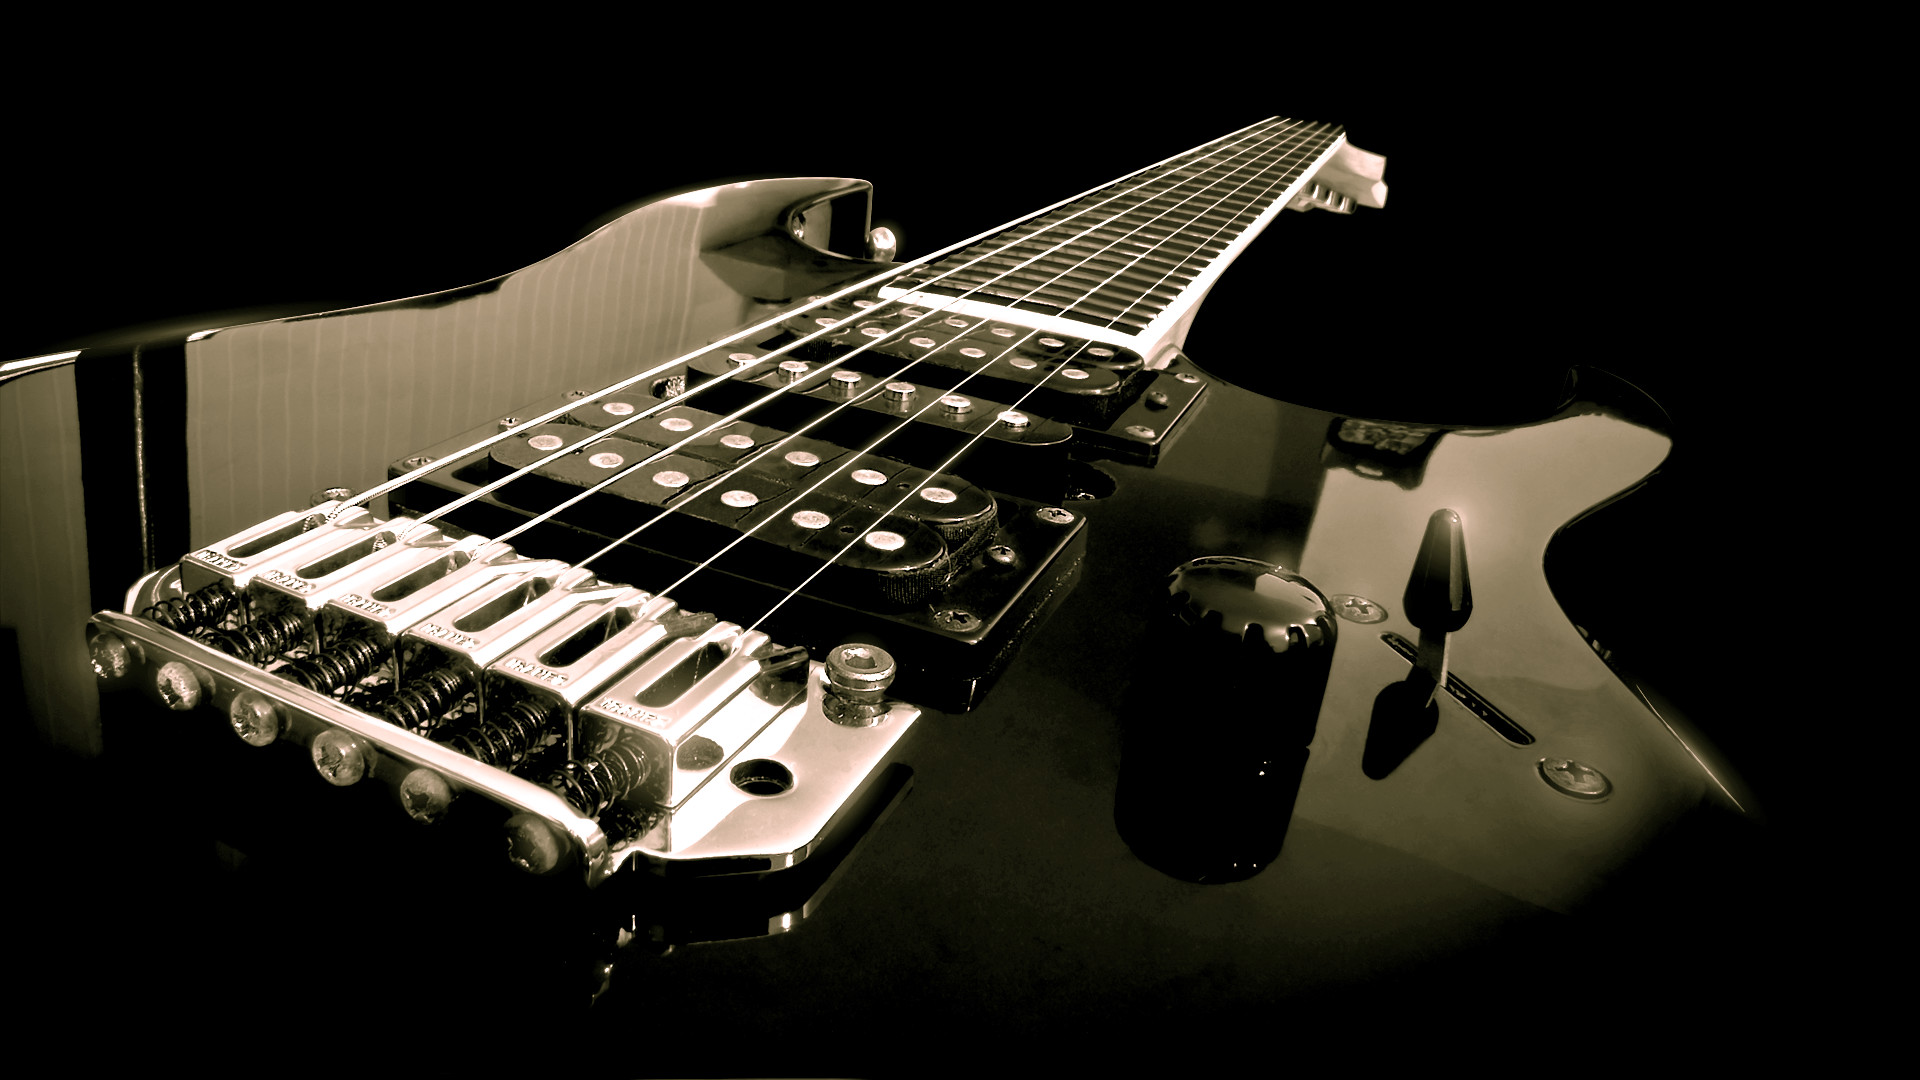 1920x1080 Ibanez Diagonal Perspective by AriesBreath Ibanez Diagonal Perspective by  AriesBreath